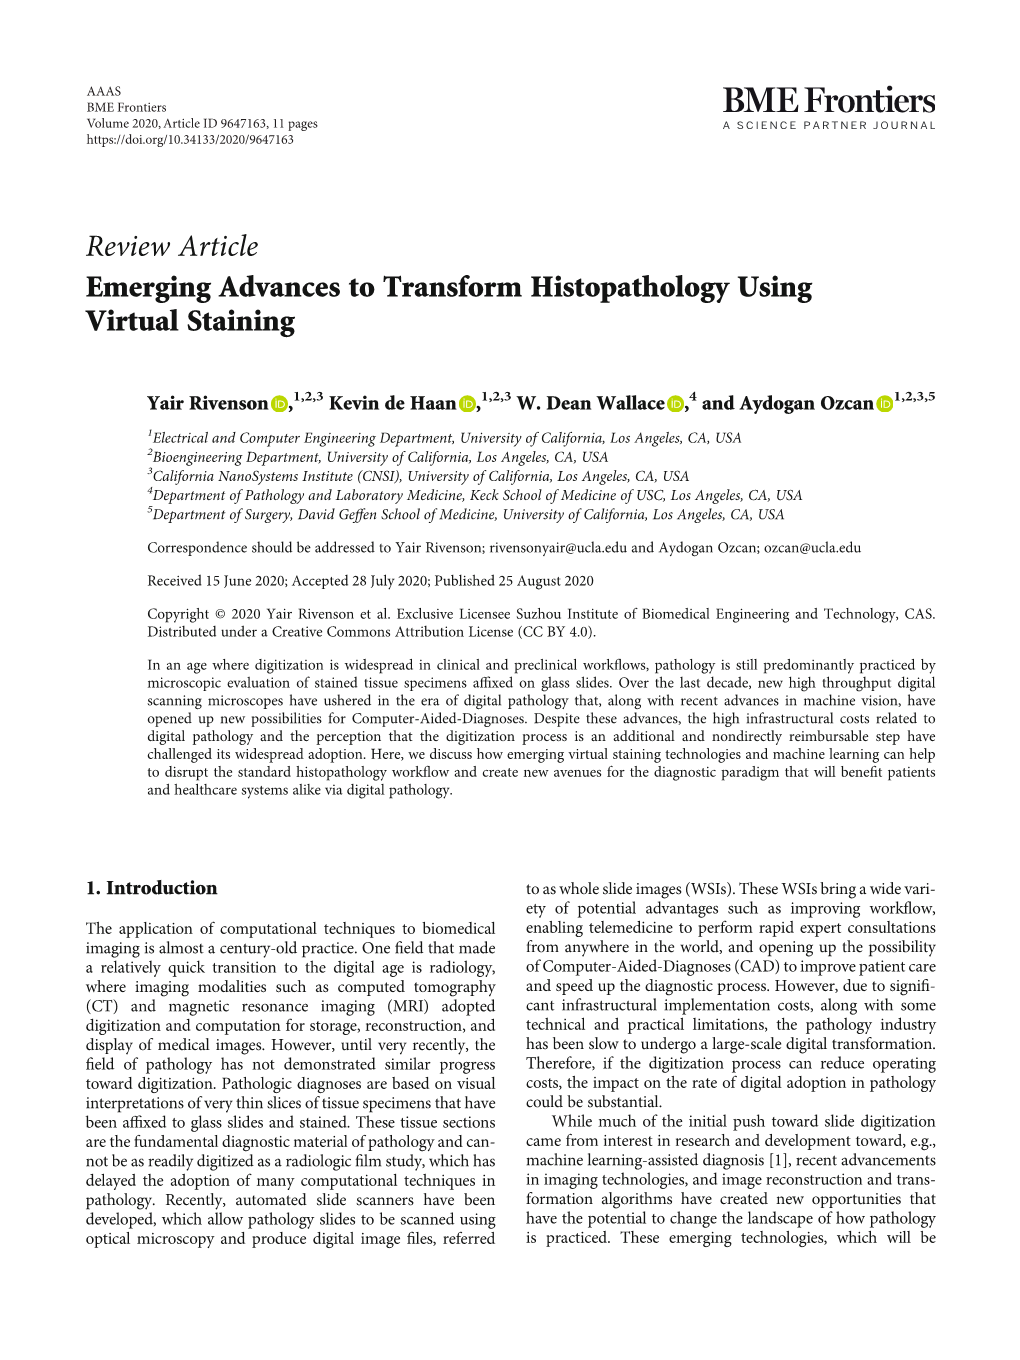 Review Article Emerging Advances to Transform Histopathology Using Virtual Staining